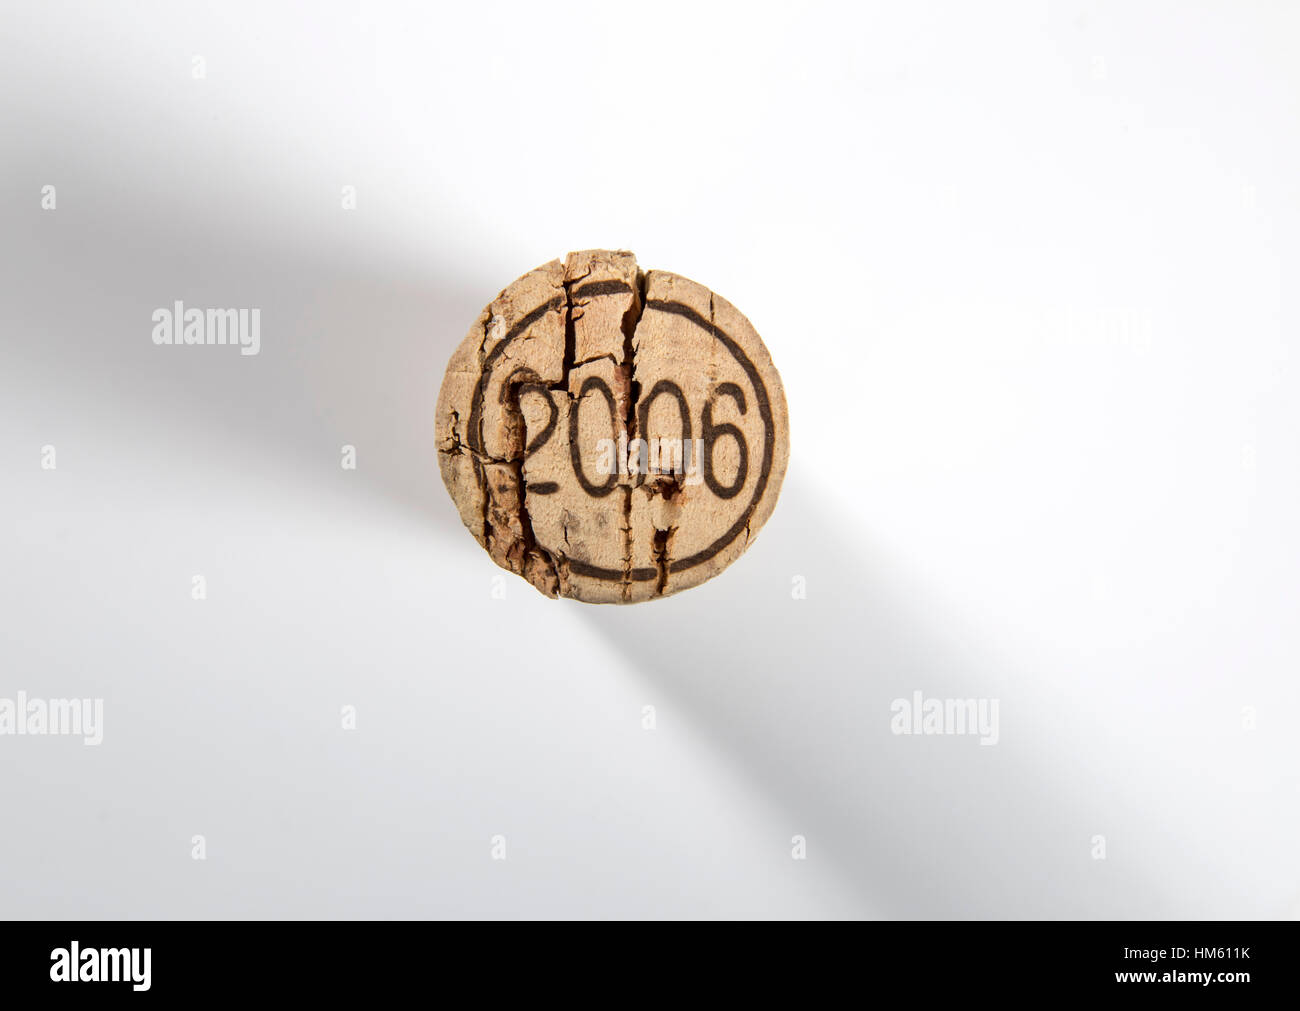 End of a wine cork Stock Photo